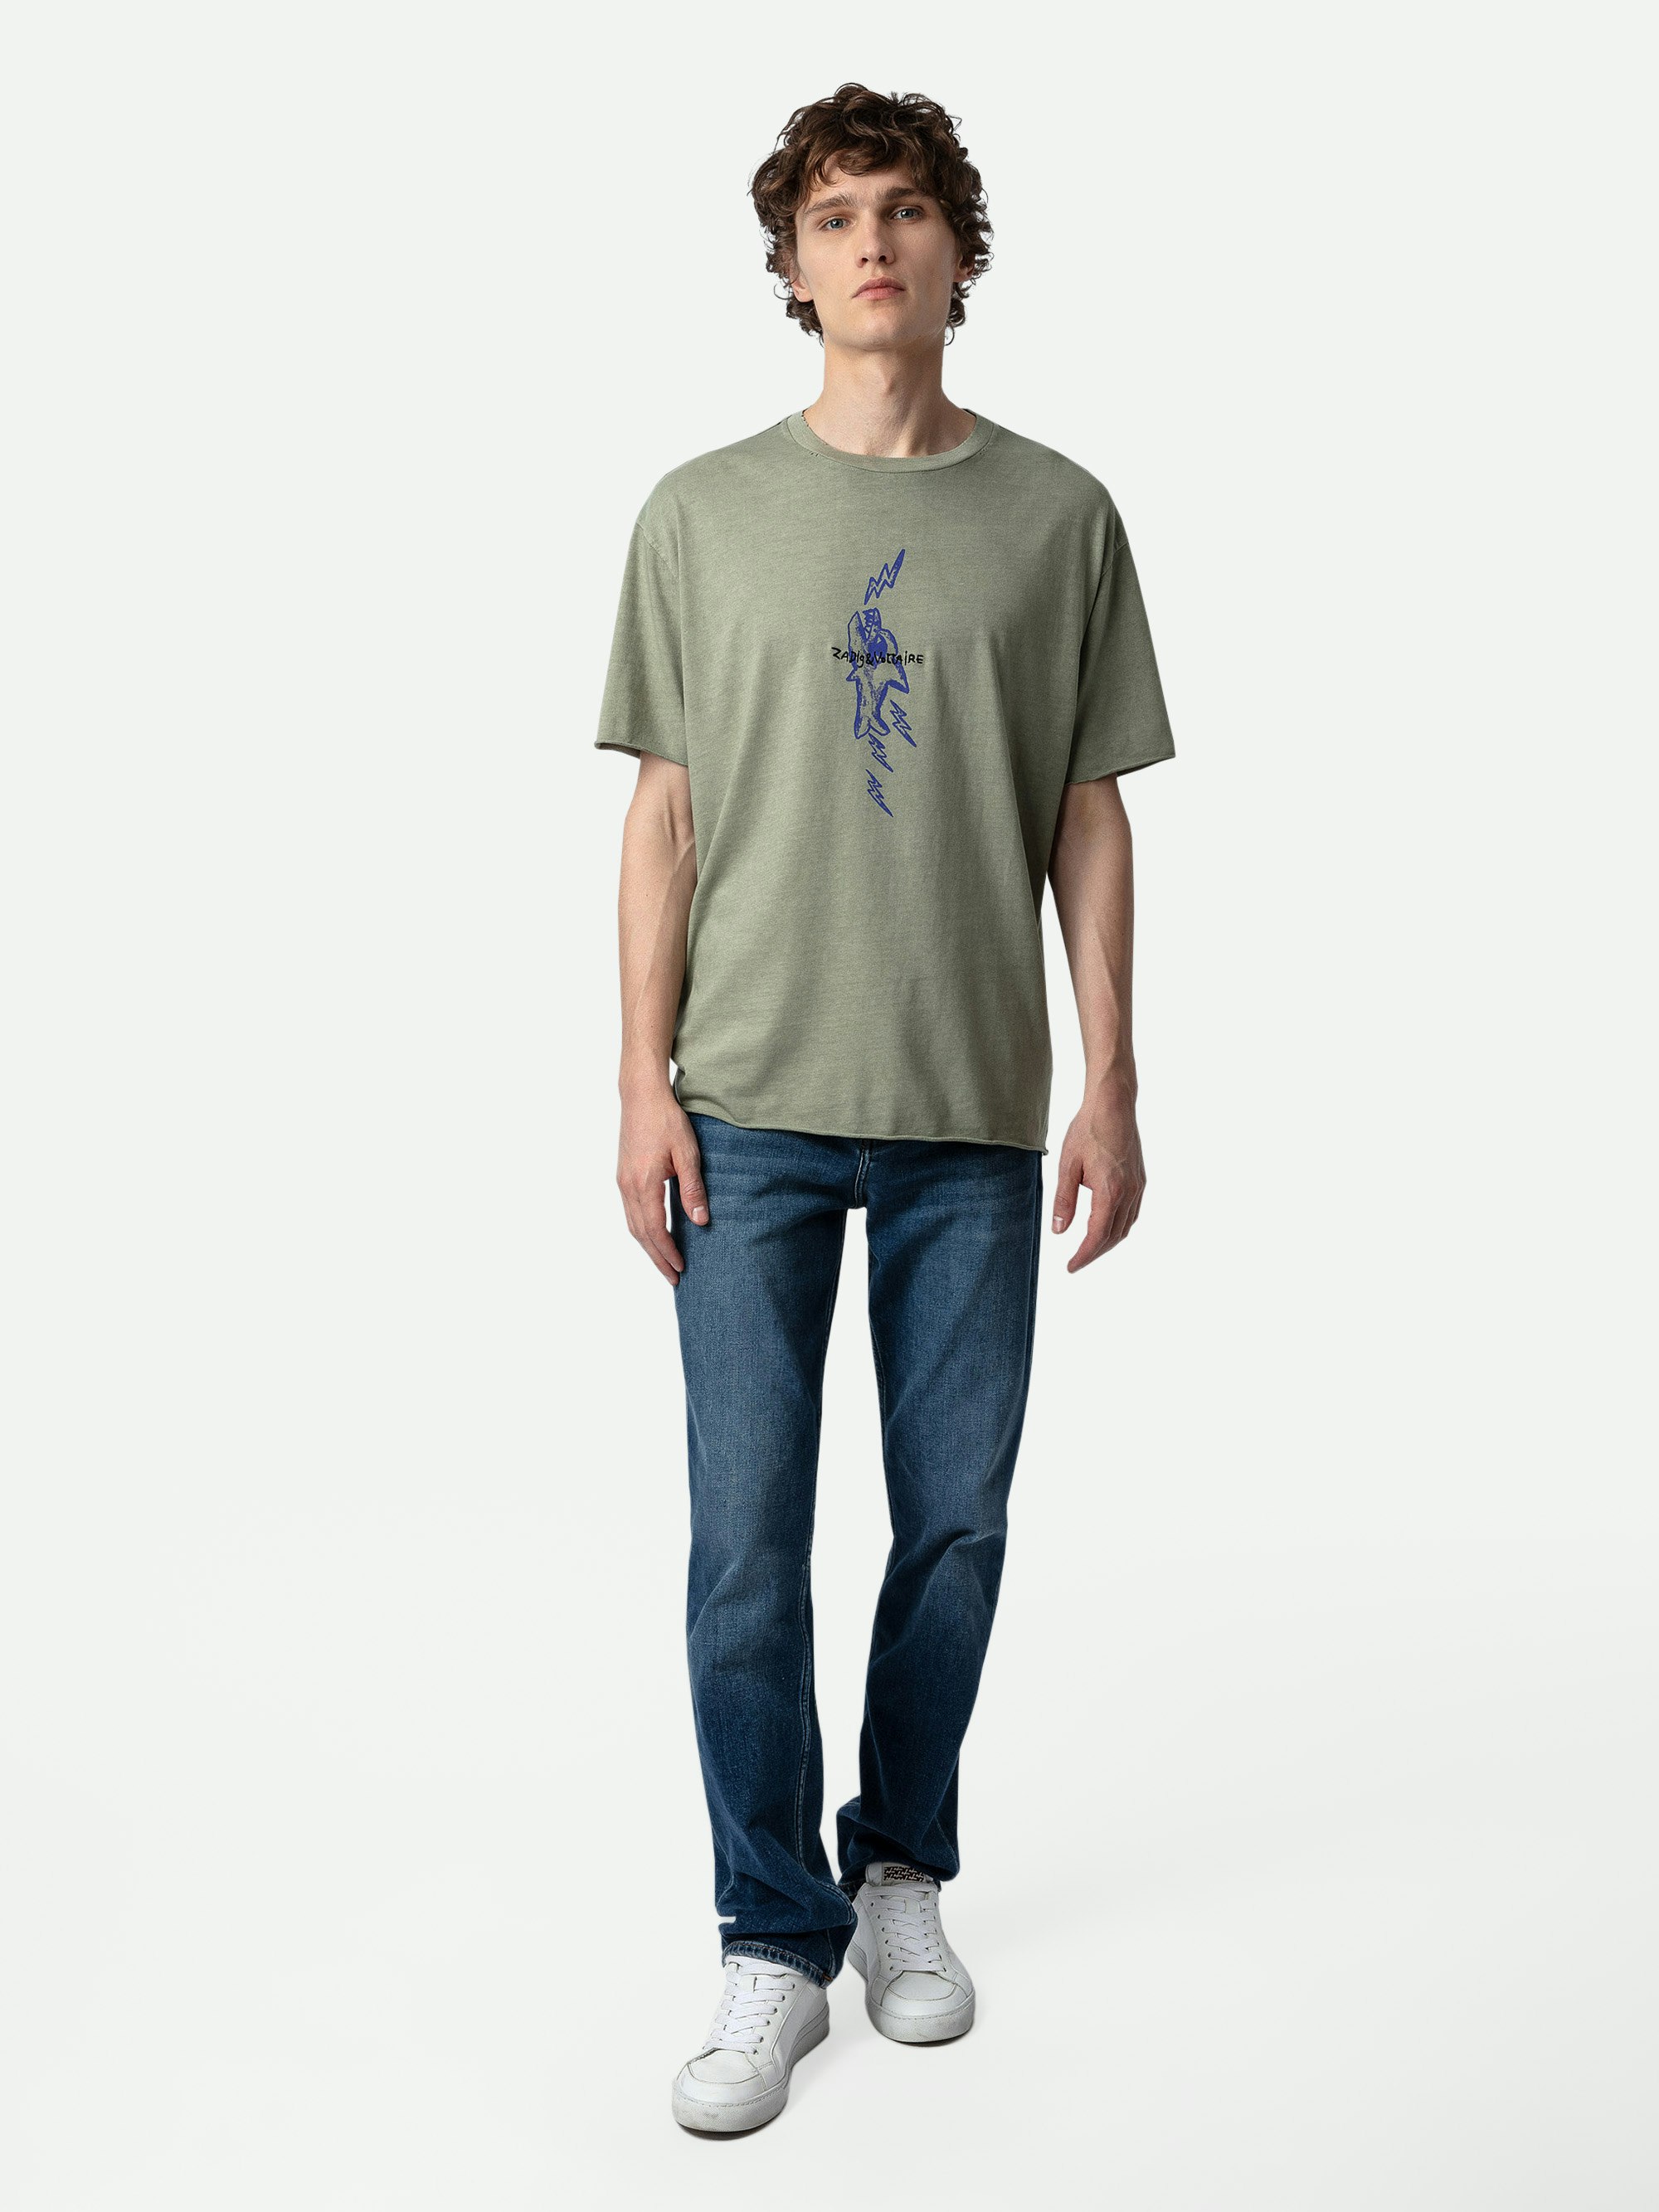 Thilo T-shirt - Grey distressed-effect cotton short-sleeved T-shirt with Shark print.